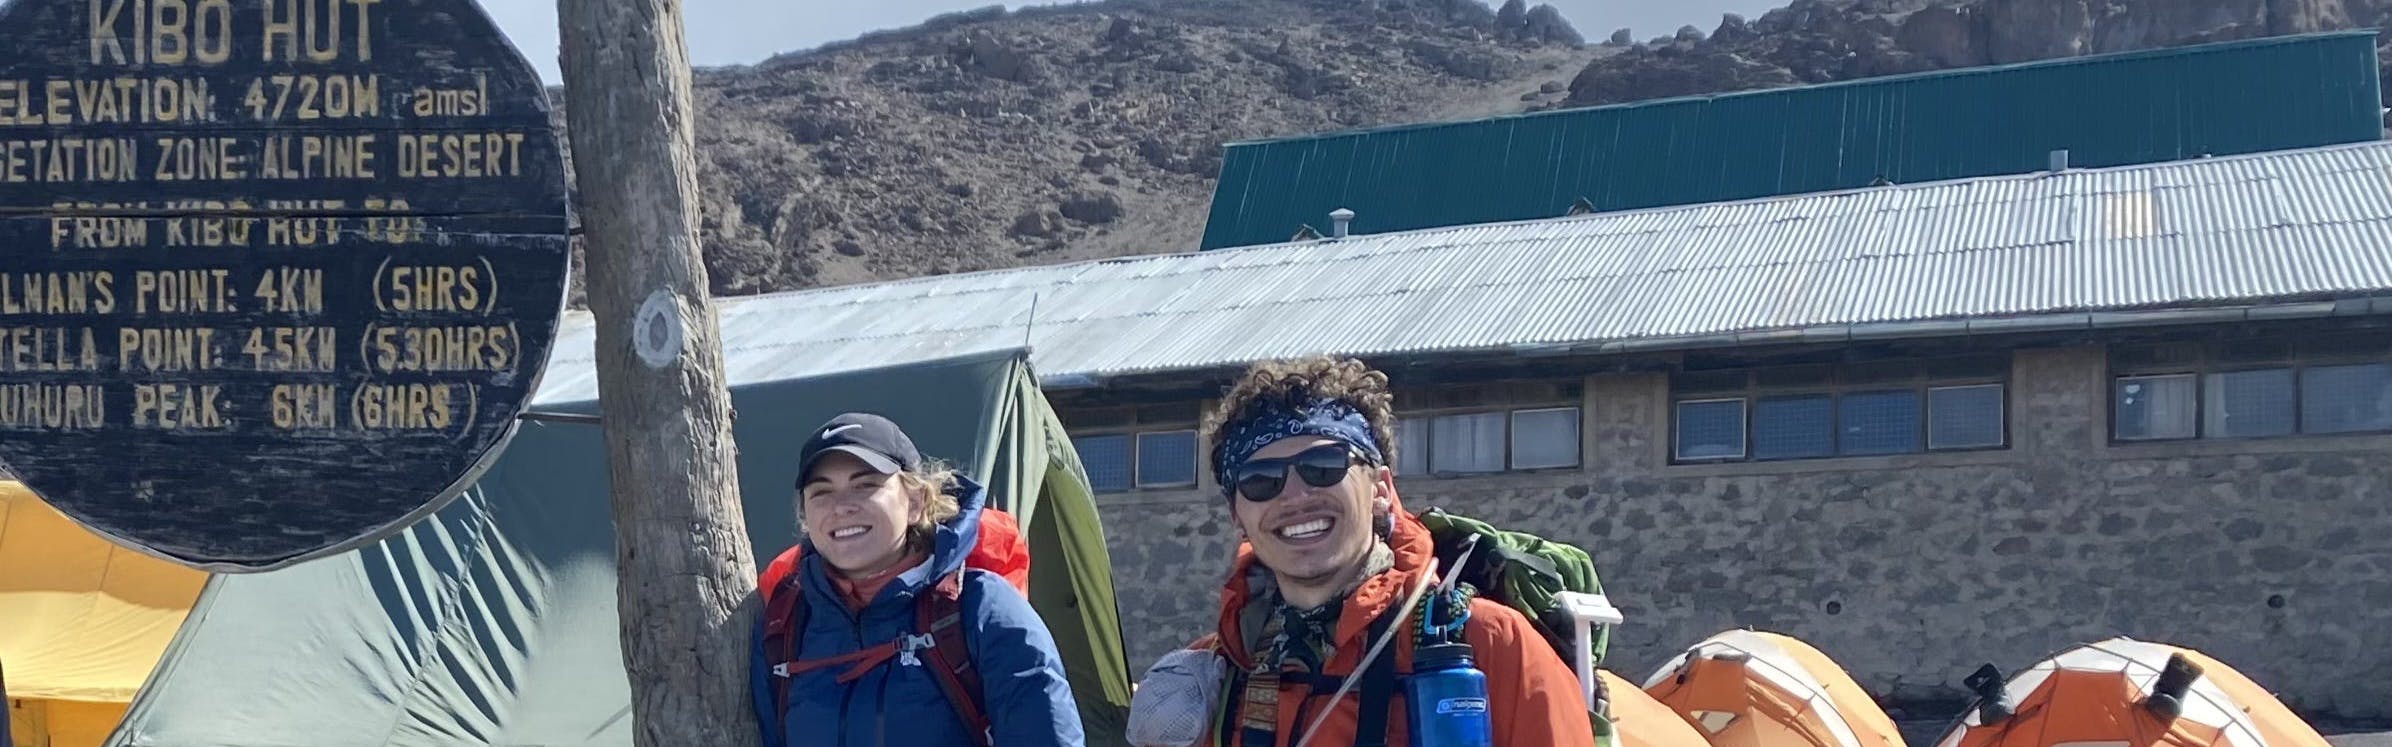 Two people stand at the bottom of a mountain with a sign indicating distances to different peaks. They are both wearing backpacking backpacks. 